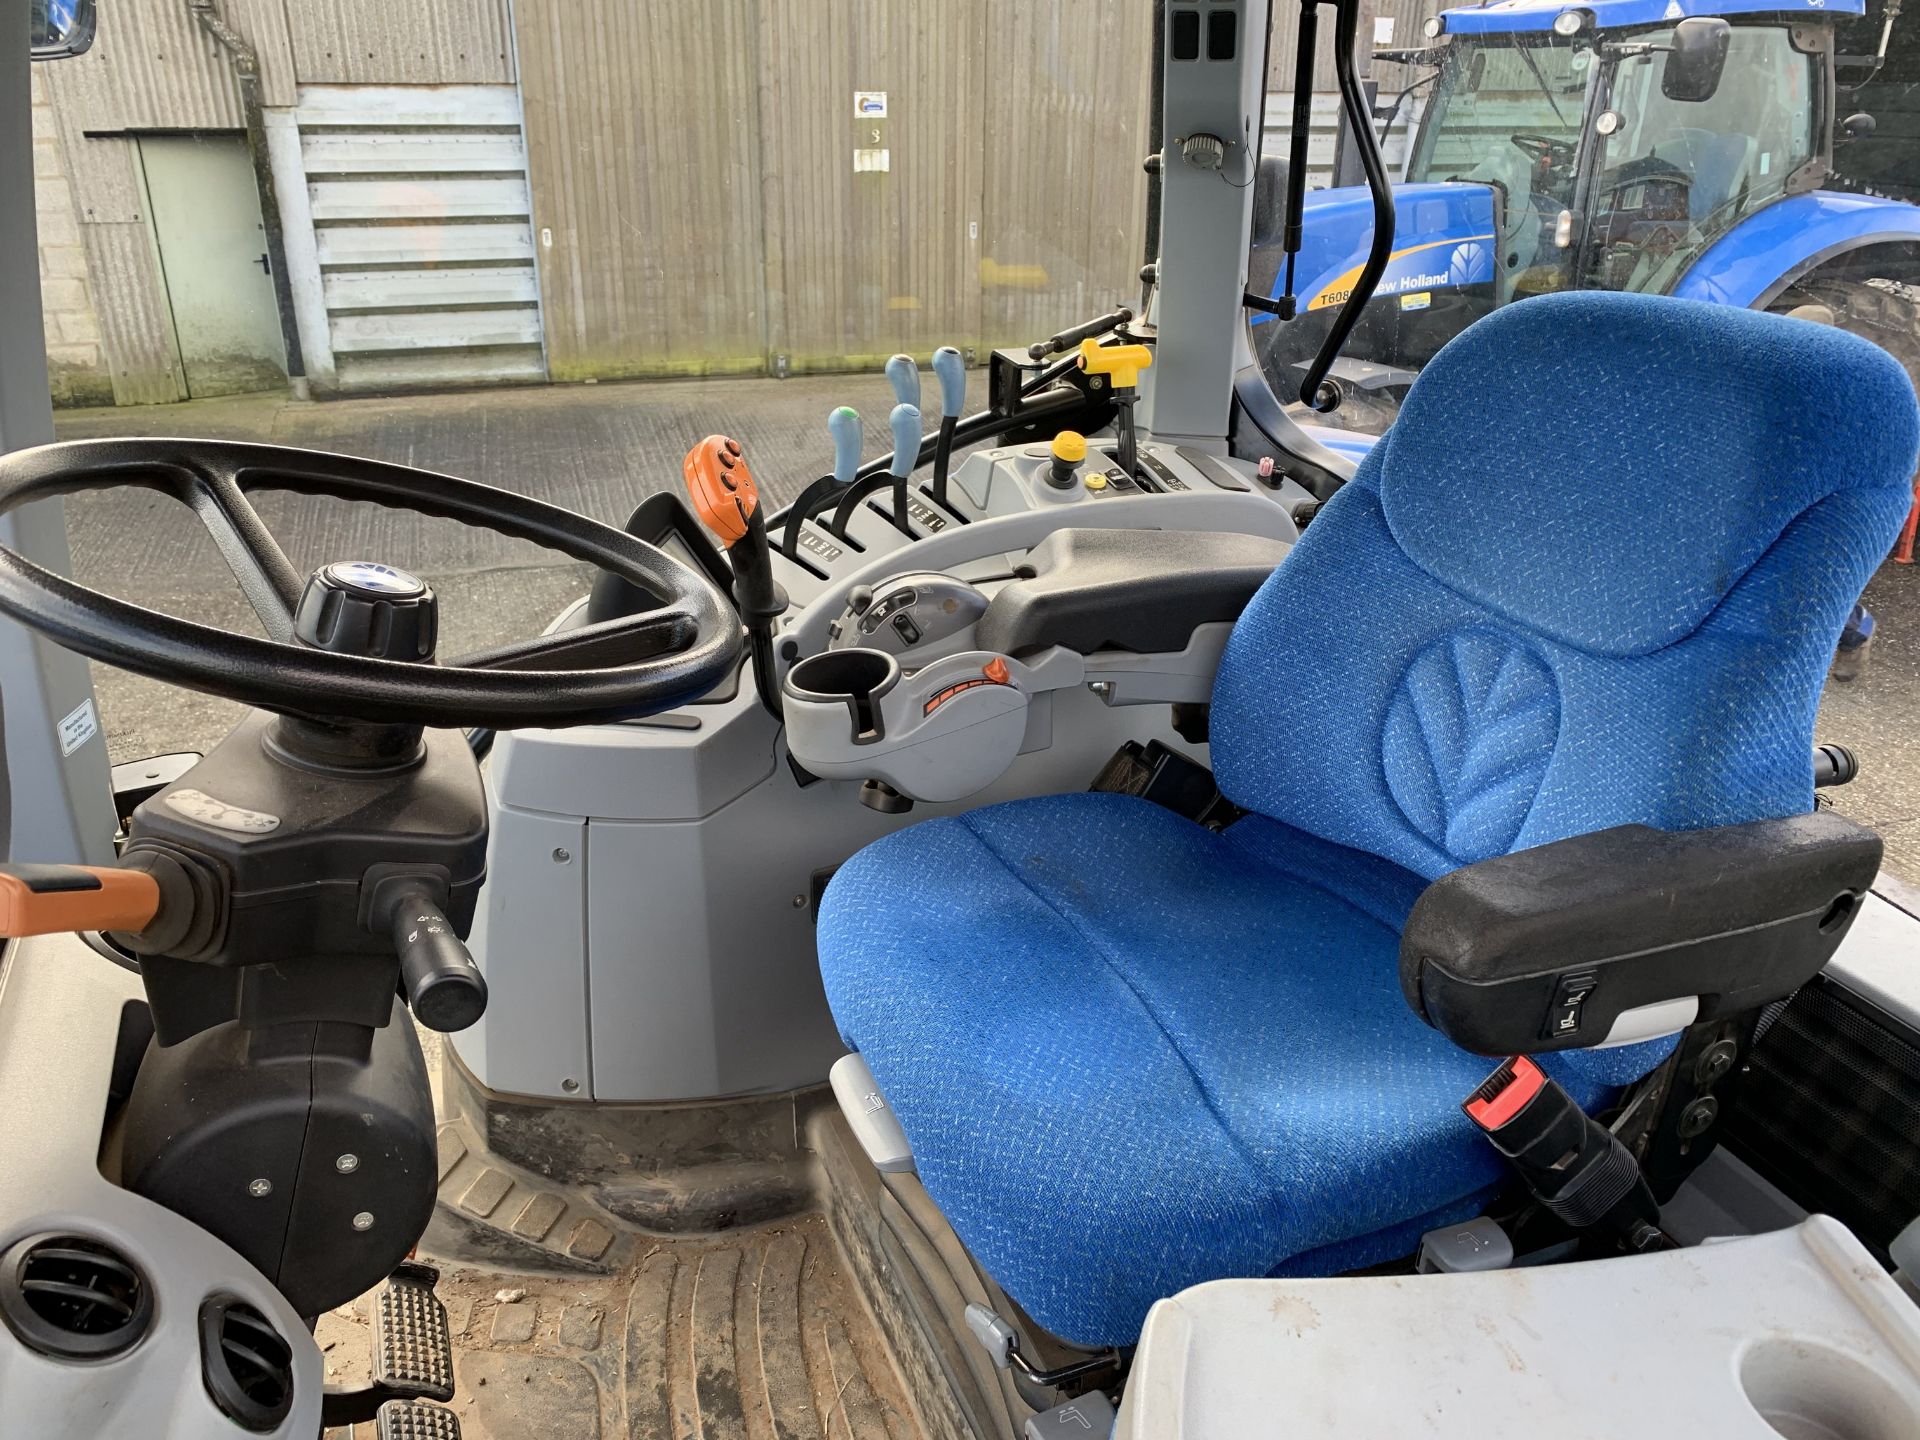 2009 New Holland T7040 tractor YX09 DKJ, 3105 hours, 22x 45kg front wafer weights, 650/65R42 rear - Image 4 of 8